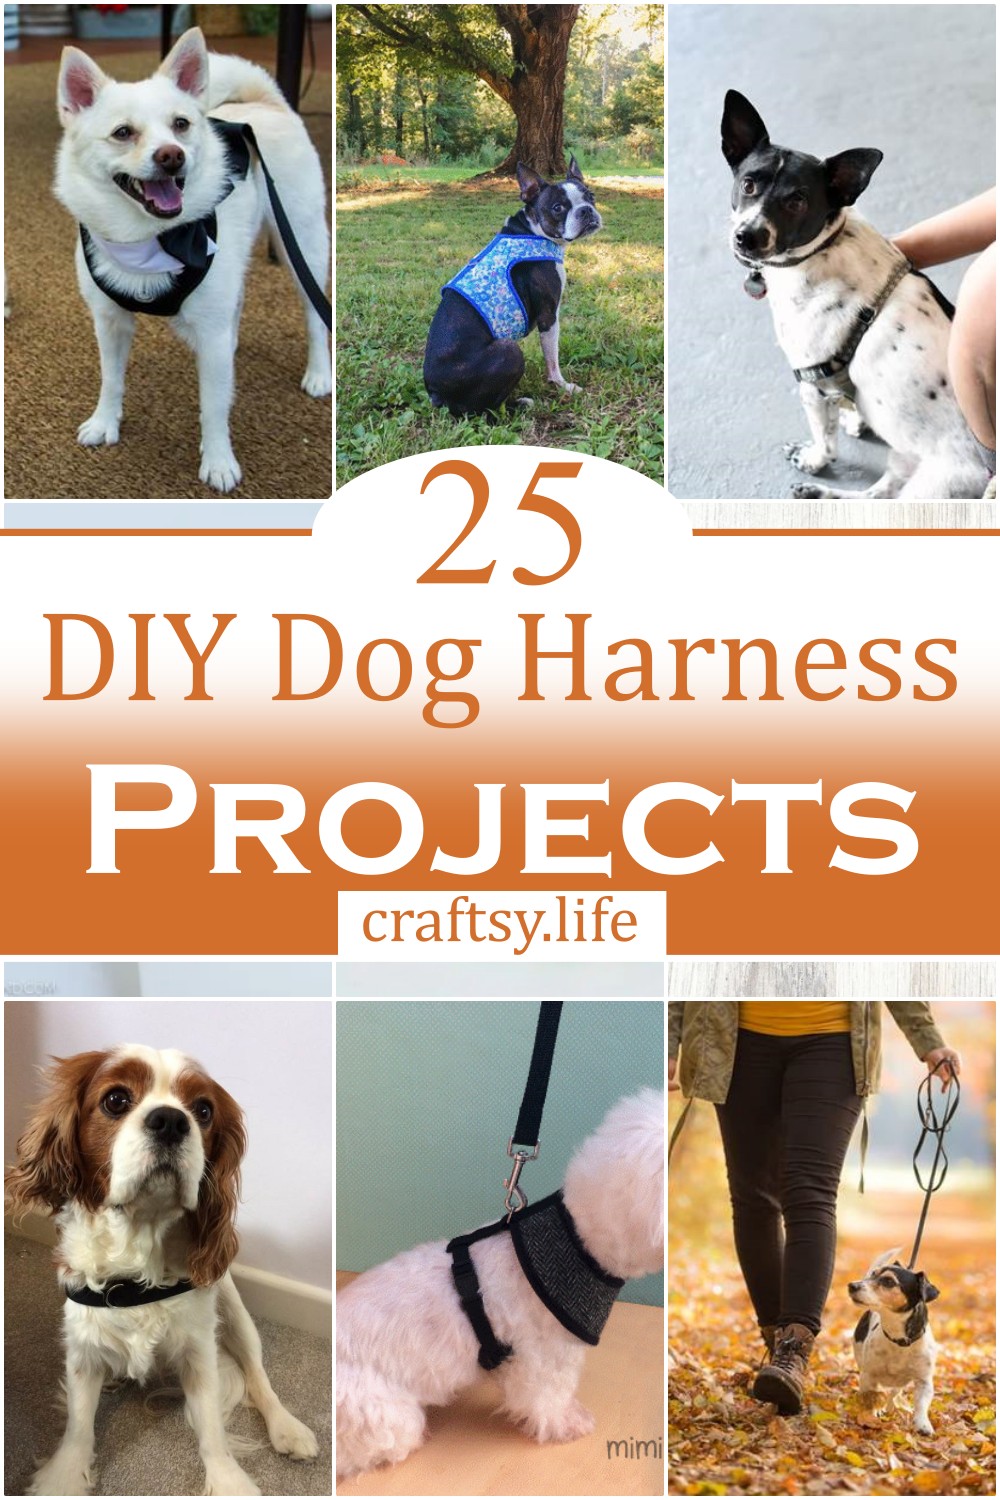 DIY Dog Harness Projects 2